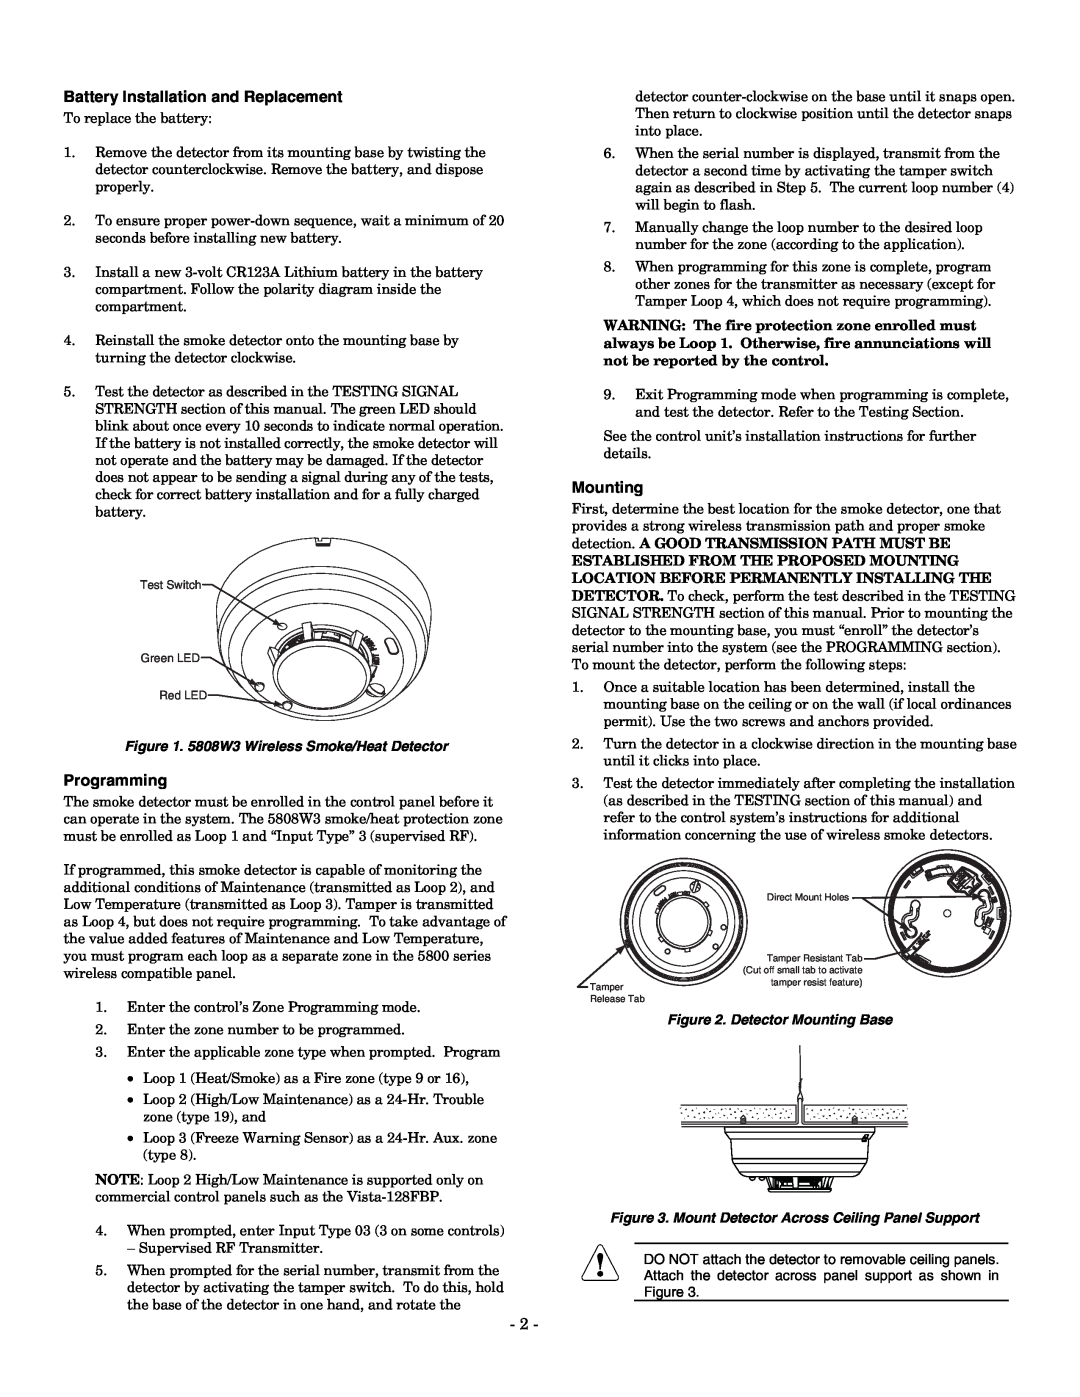 Honeywell setup guide Battery Installation and Replacement, Programming, Mounting, 5808W3 Wireless Smoke/Heat Detector 